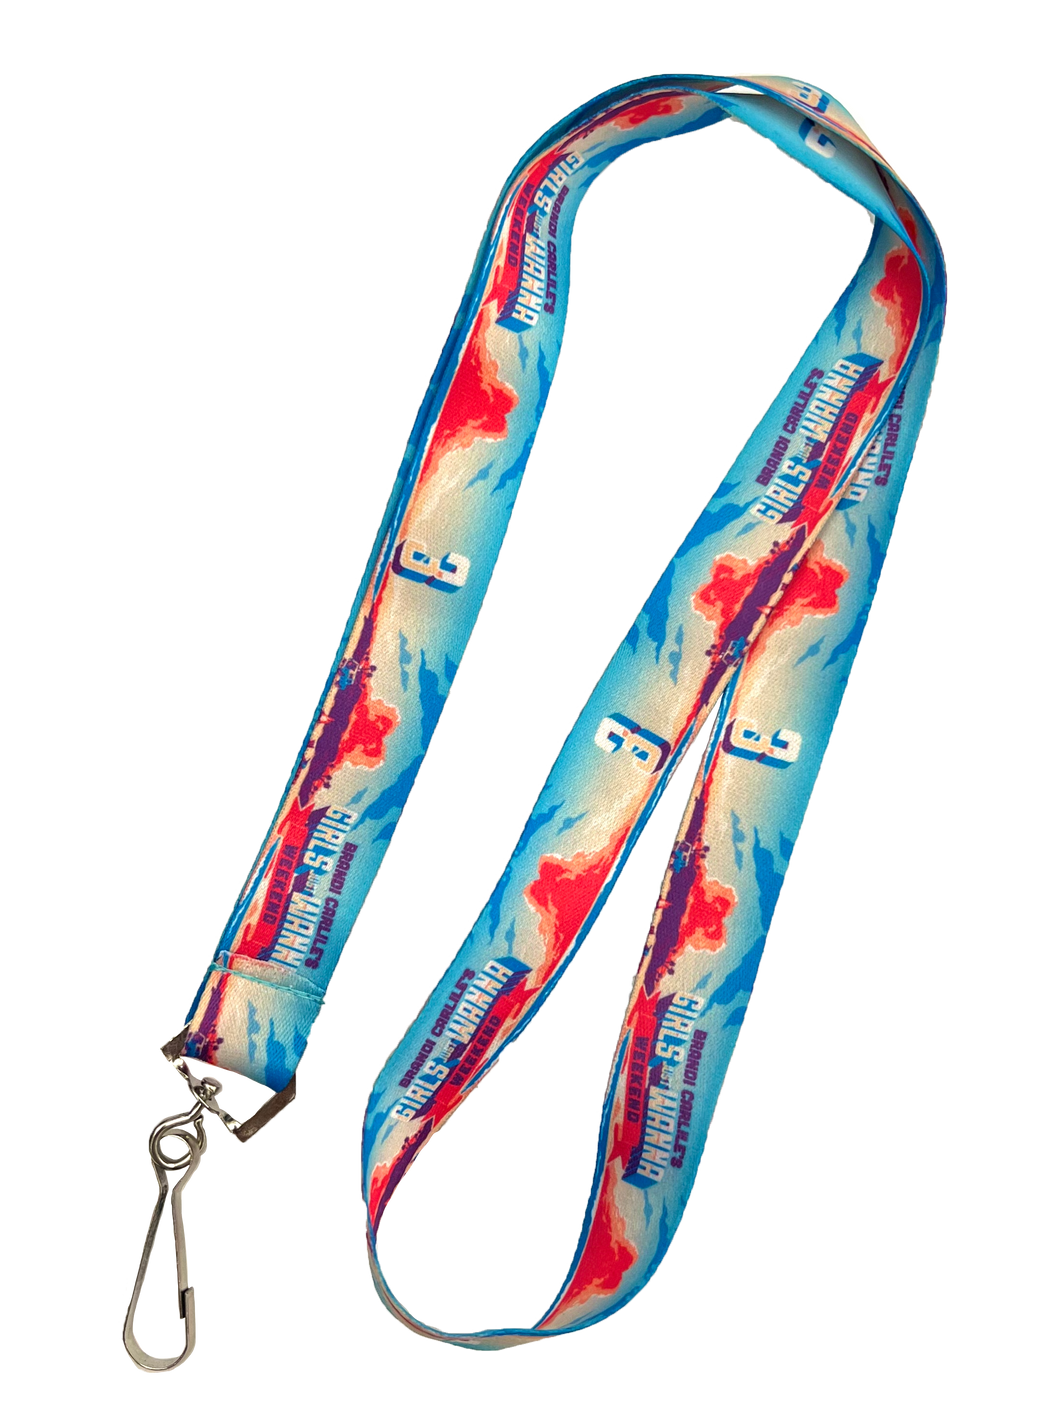 Girls Just Wanna Weekend 2022 Lanyard (Includes Shipping)